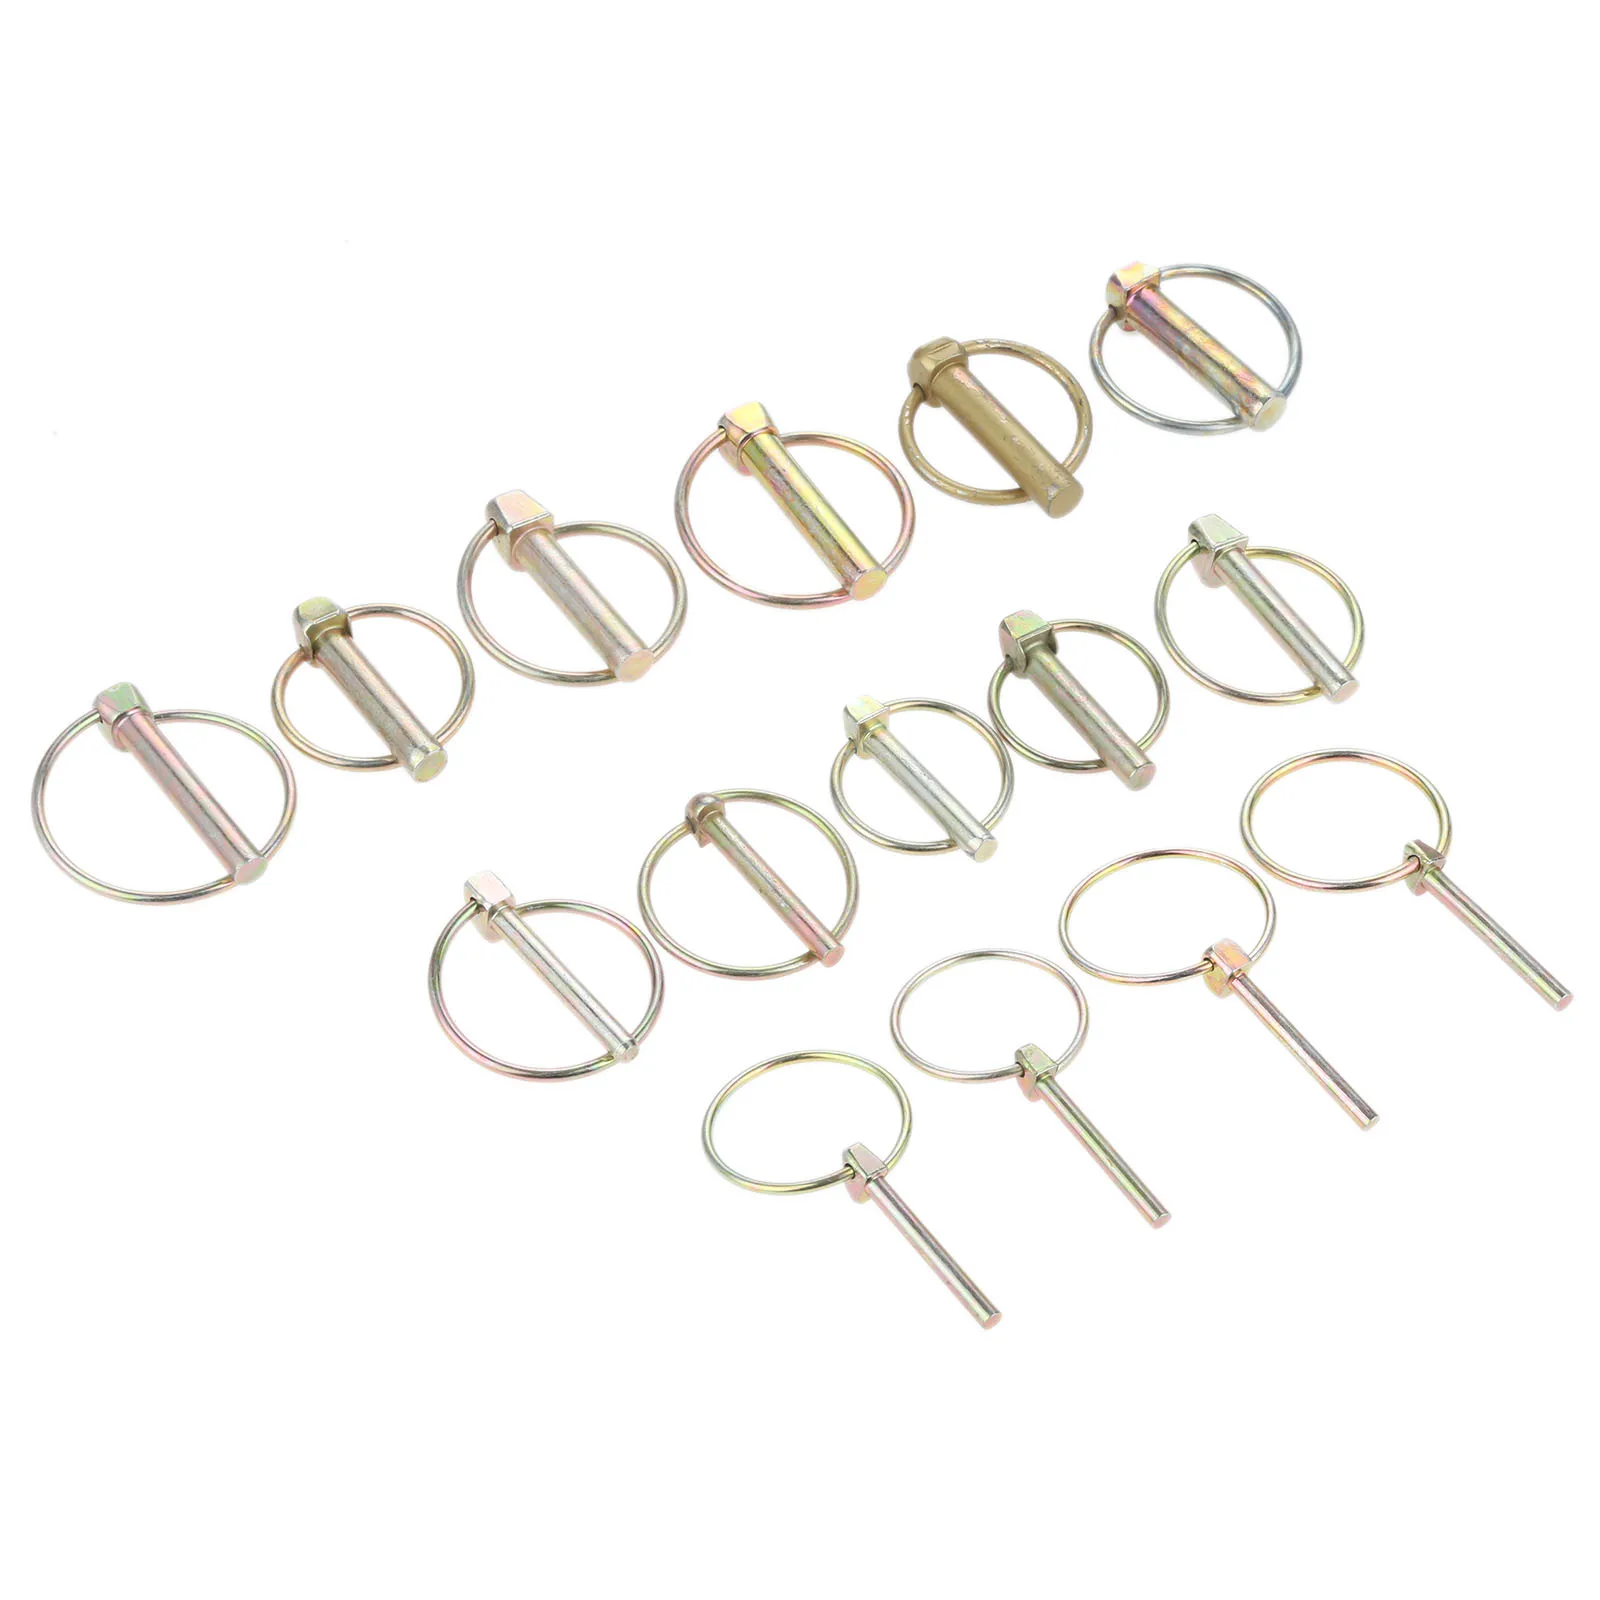 uxcell Linch Pin with Ring 4.5mm x 38mm Trailer Pins Assortment Kit for Boat Kayak Canoe Trailer Tractor Trolley Horsebox 5Pcs